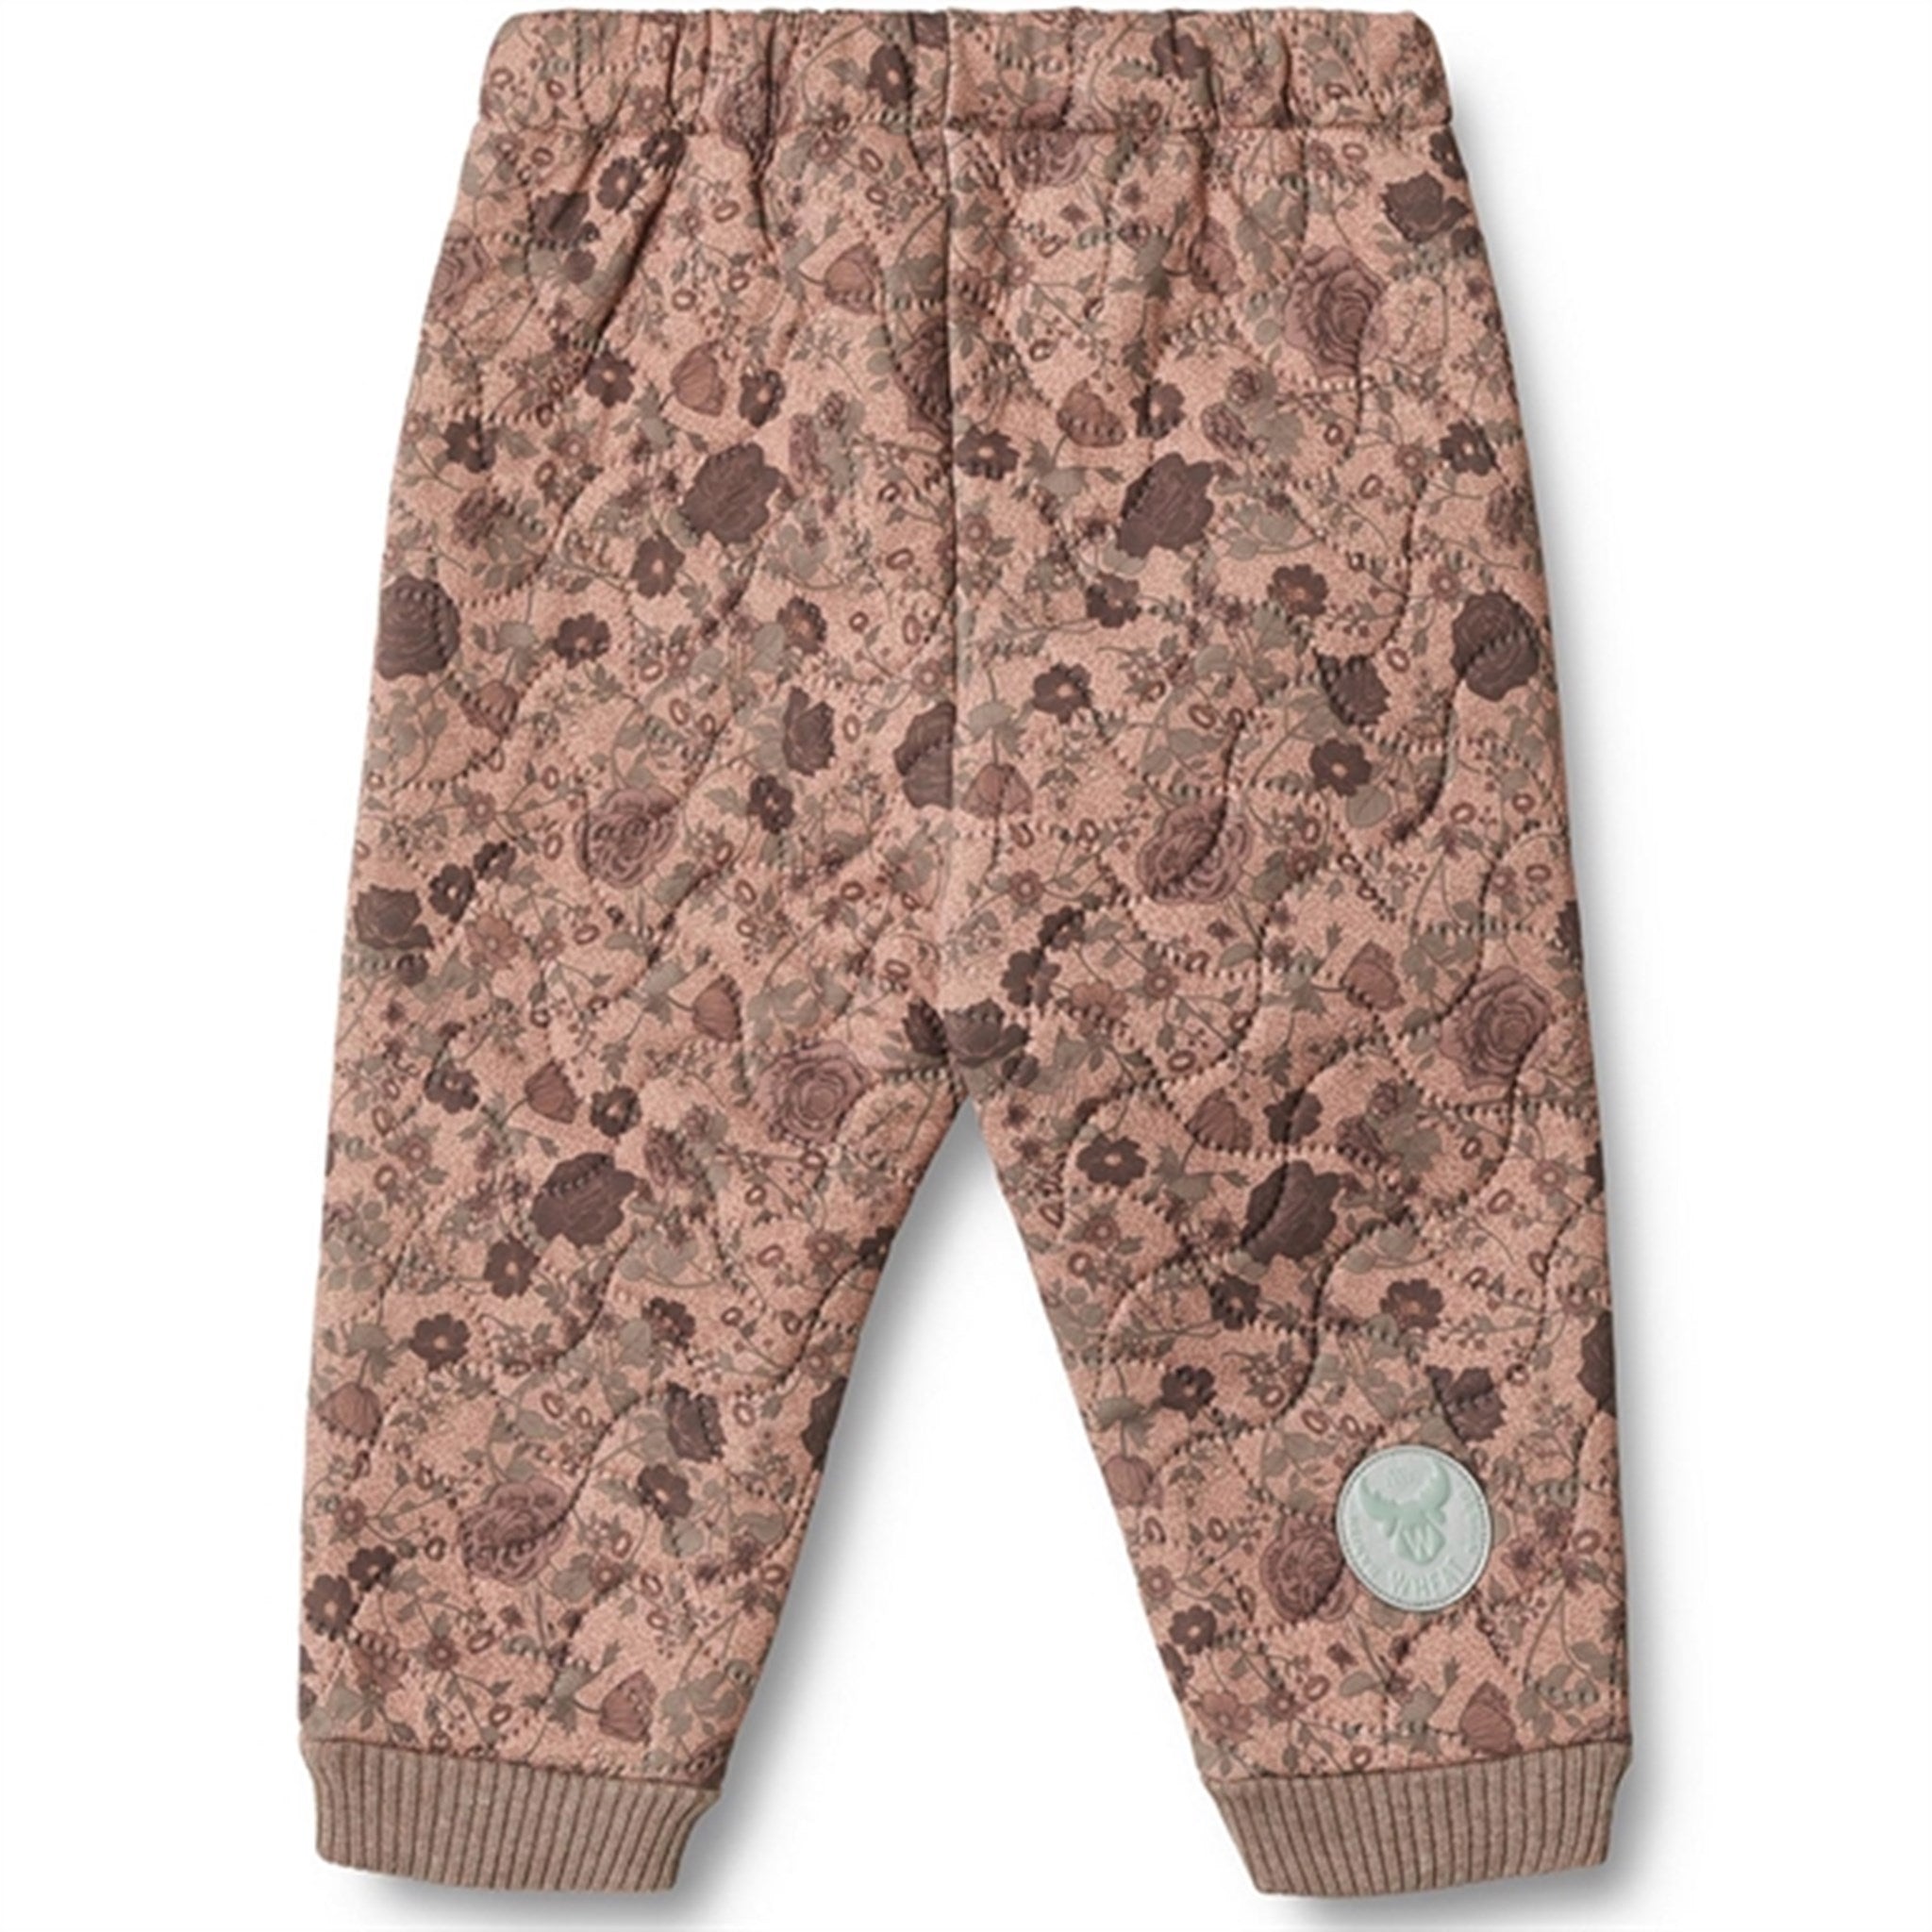 Wheat Thermo Rose Dawn Flowers Pants Alex 2